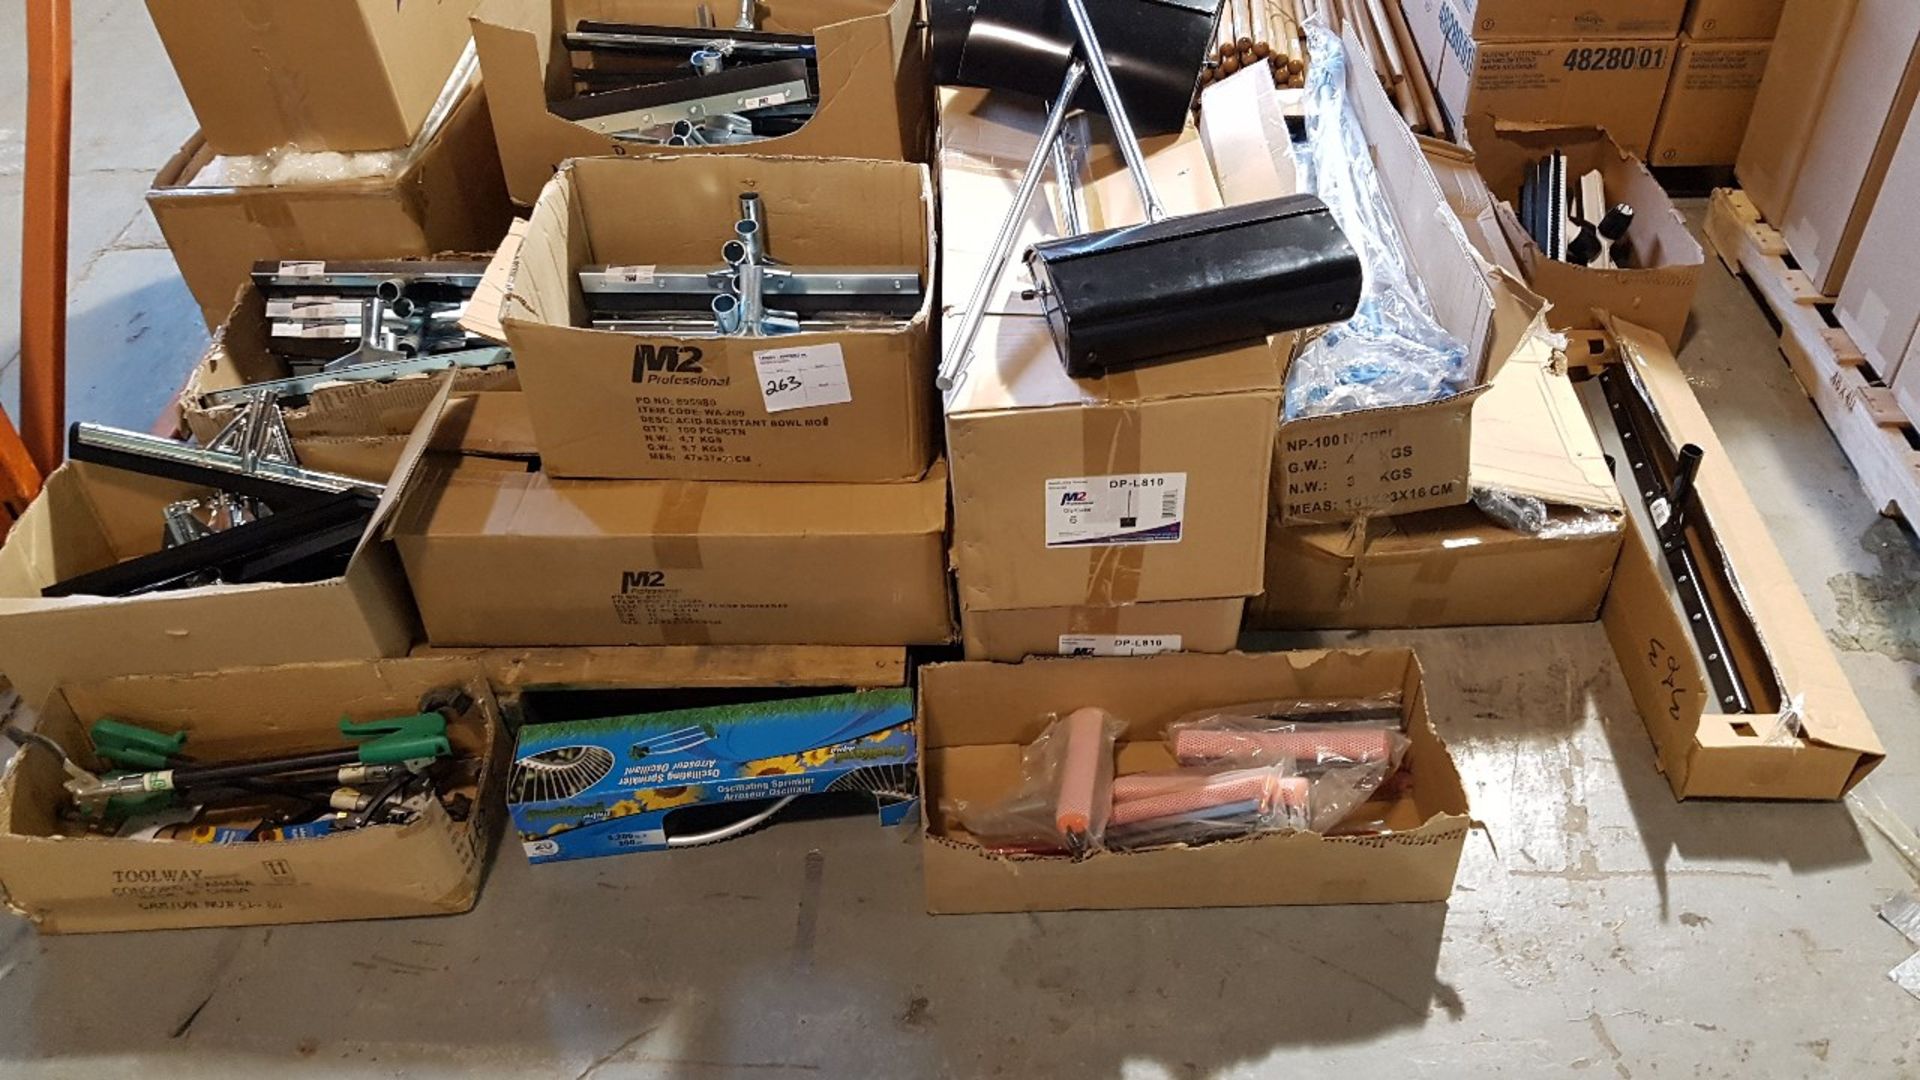 LOT OF SQUEEGE TOPS (Various Sizes), SQUEEGE HANDLES, DUSTPANS, HOSE HANDLES AND ATTACHMENTS